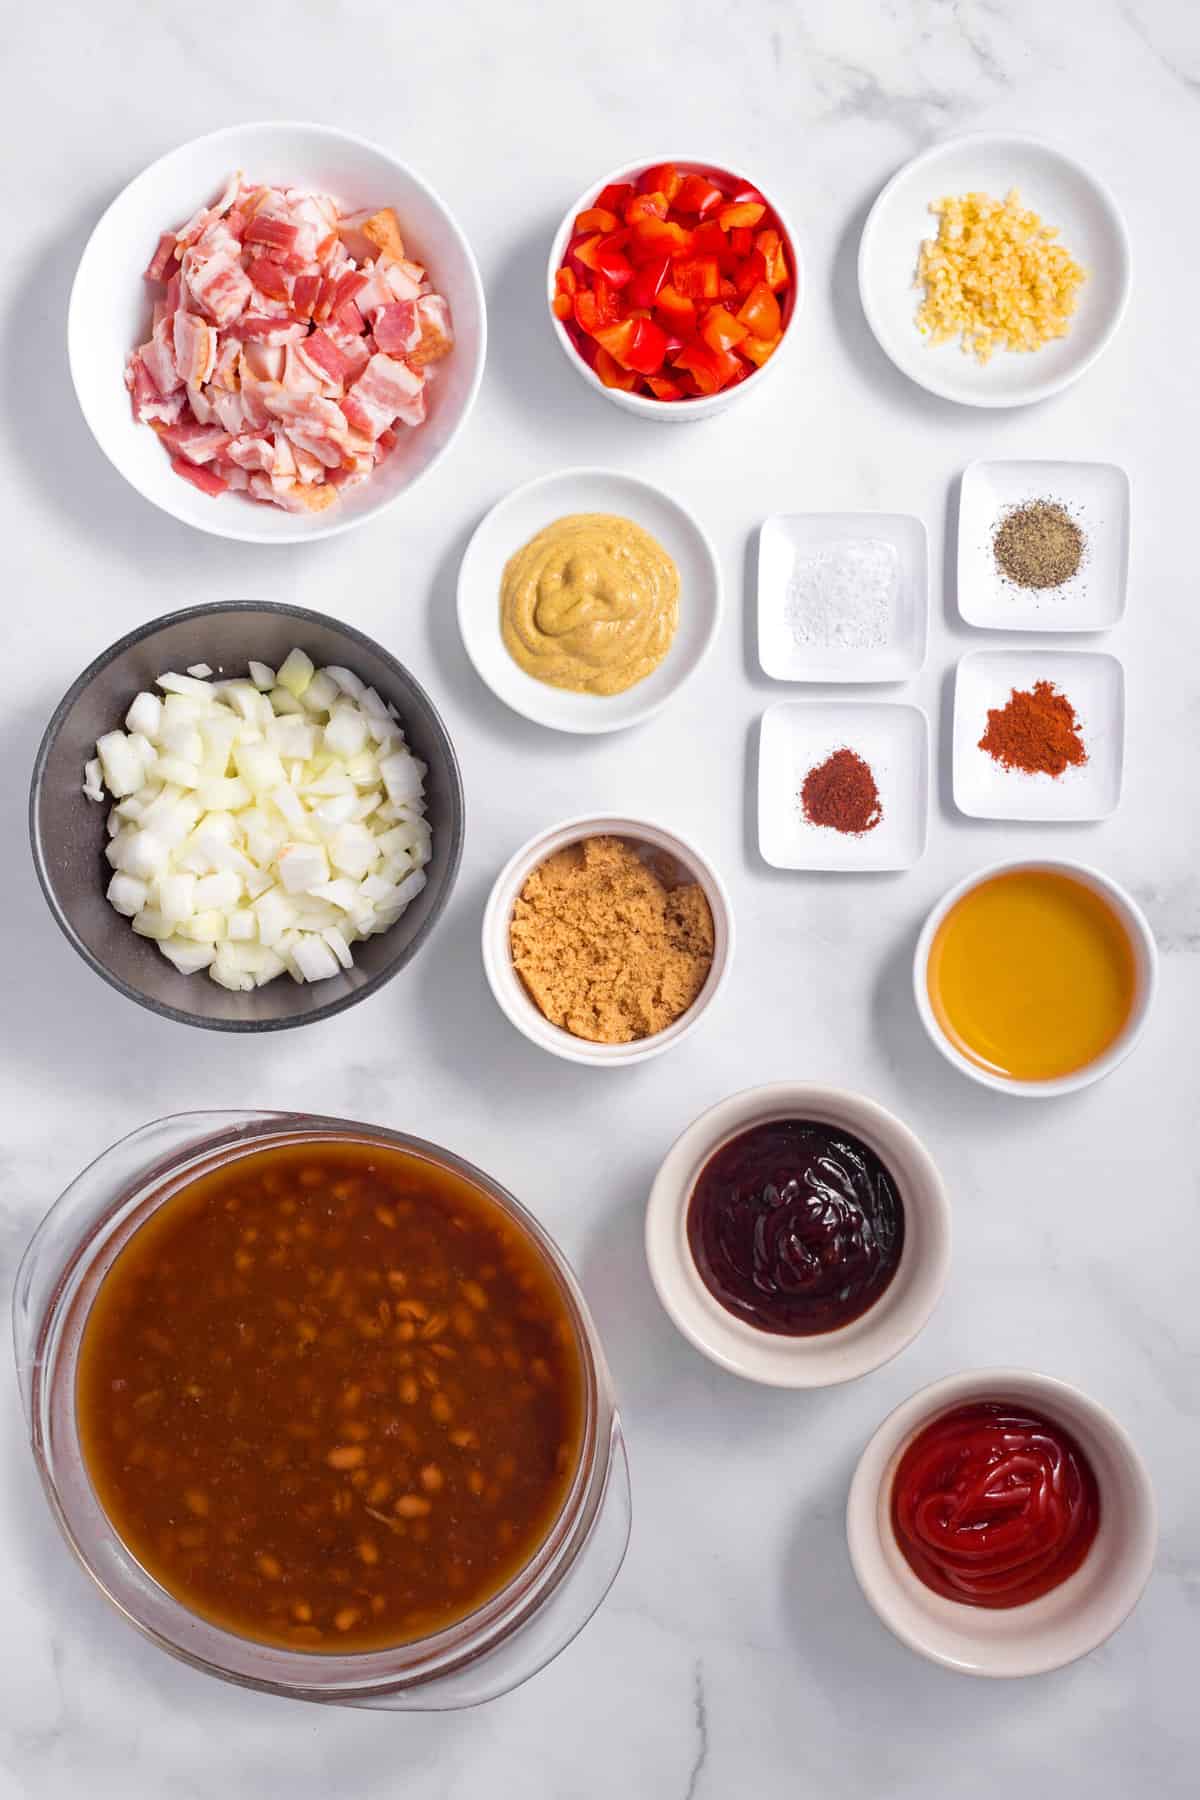 ingredients to make baked beans at home